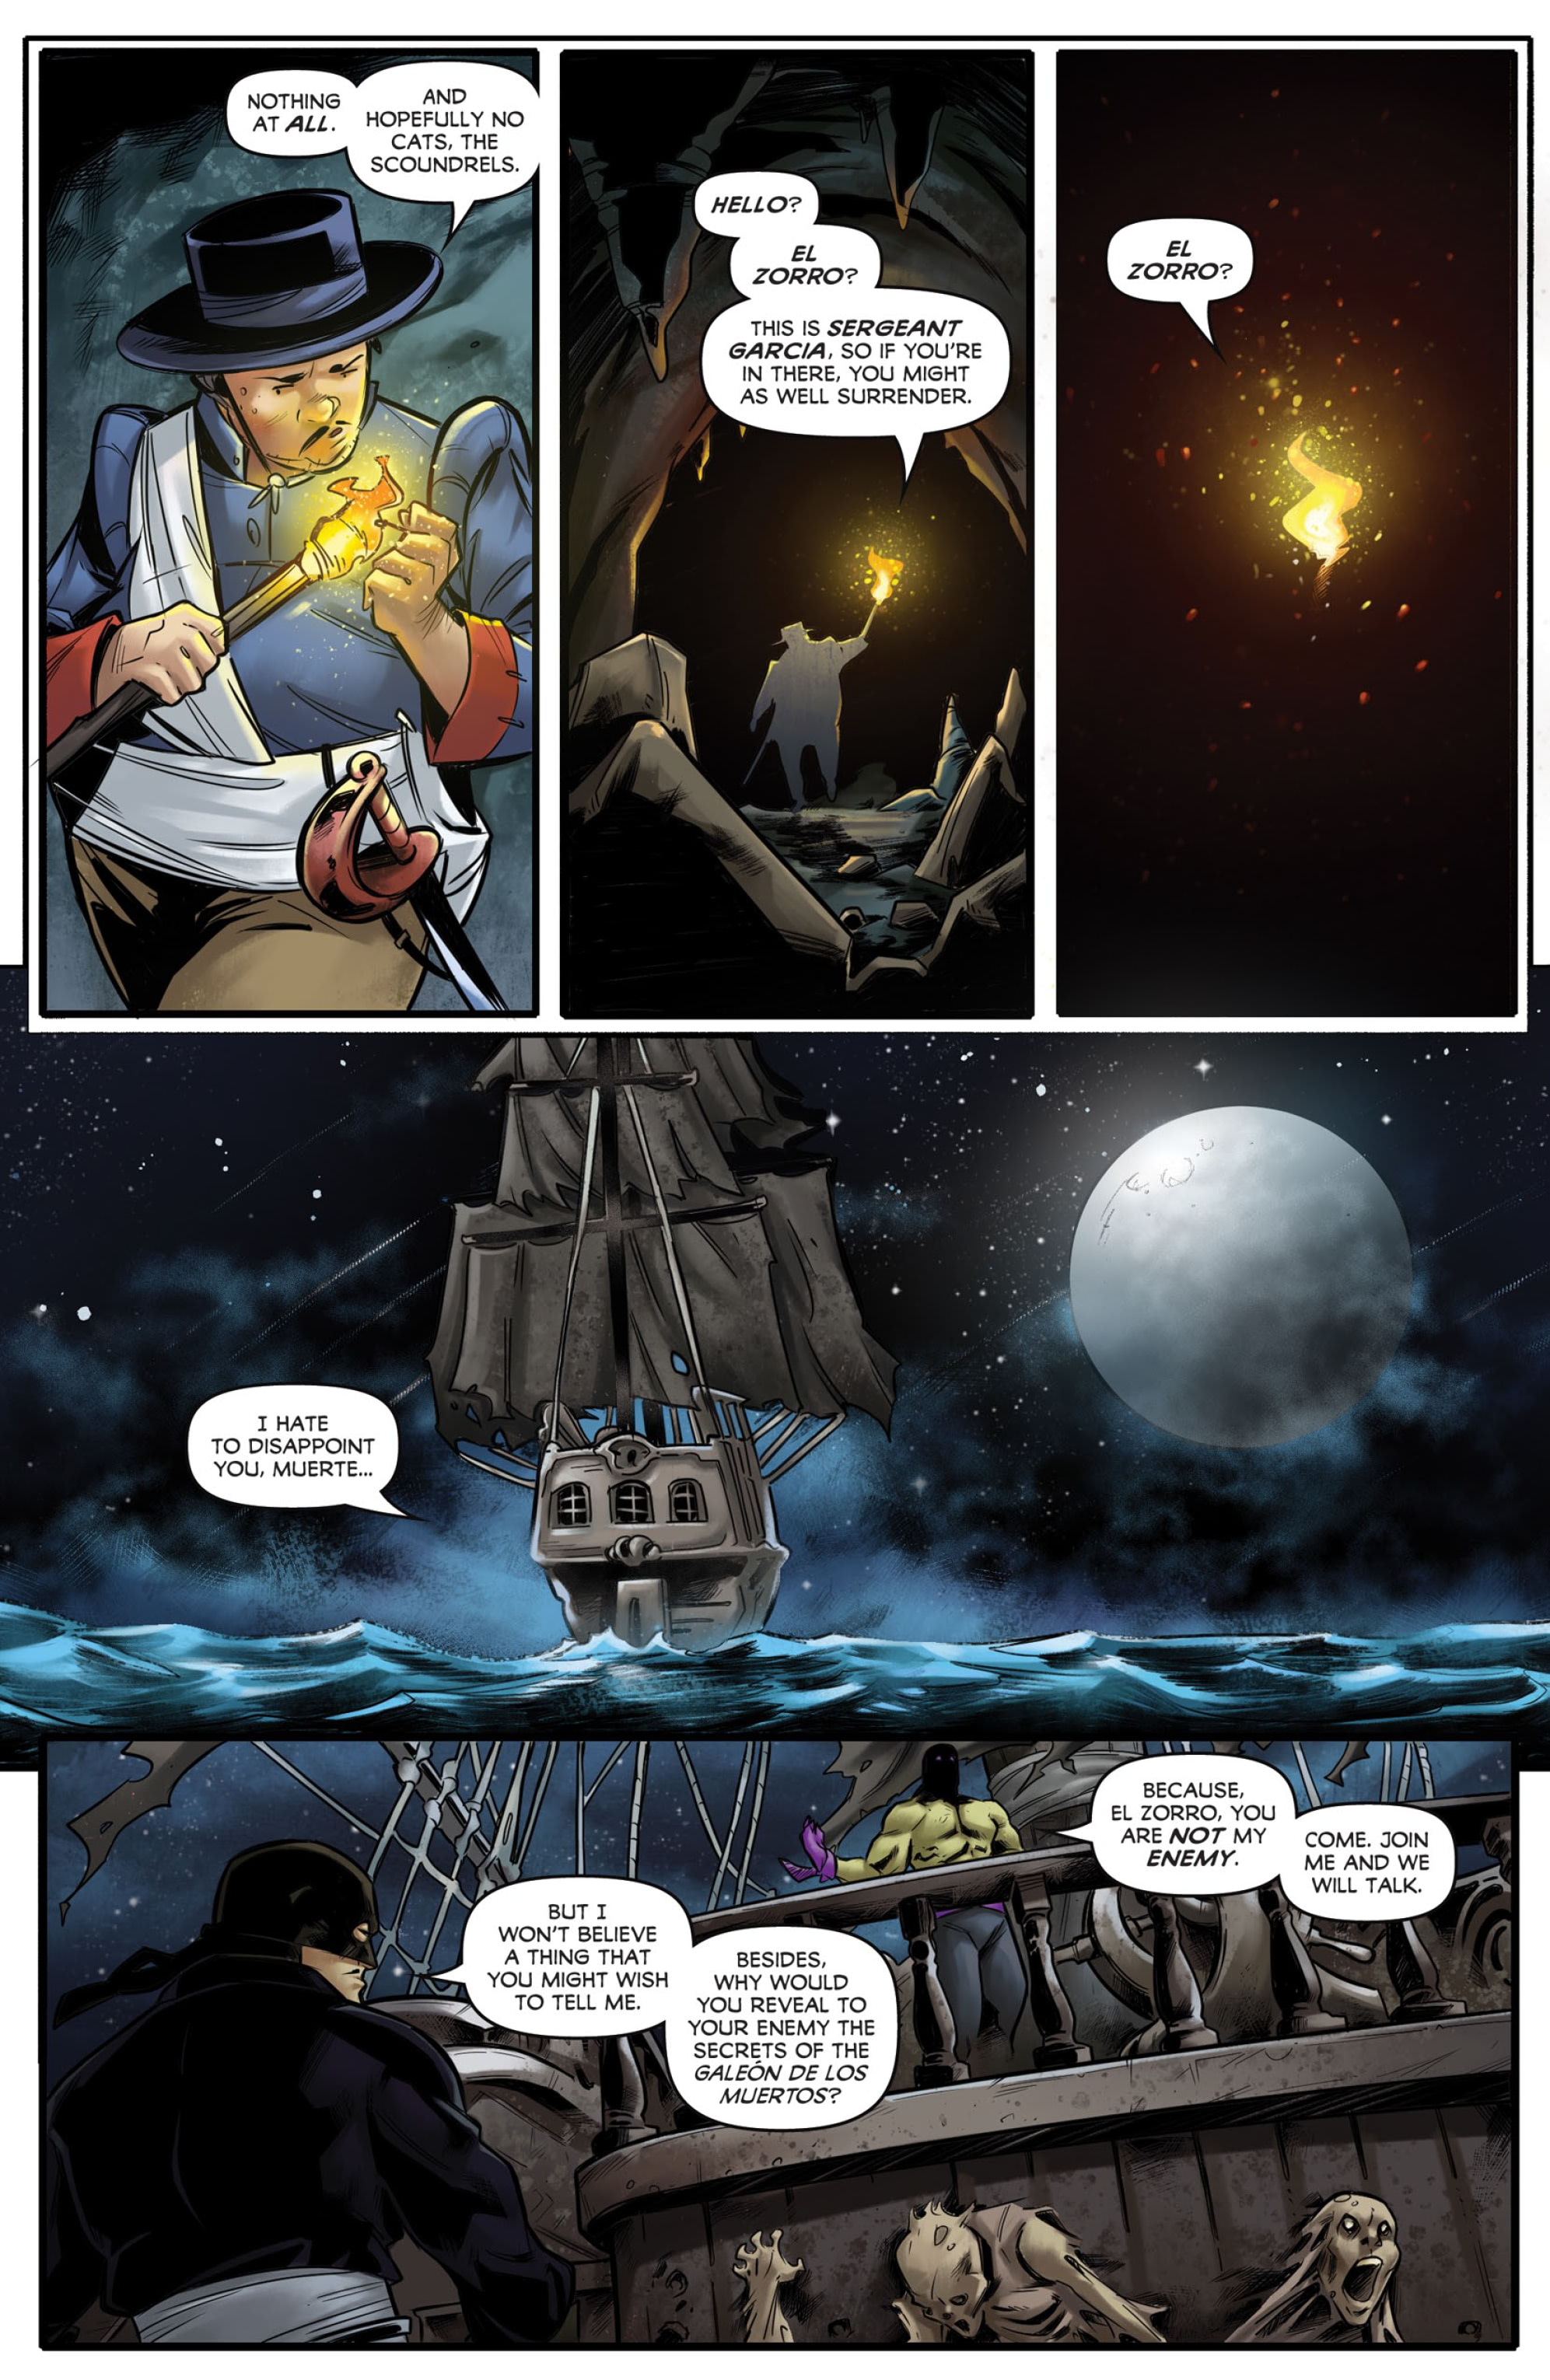 Zorro: Galleon Of the Dead (2020-): Chapter 3 - Page 4